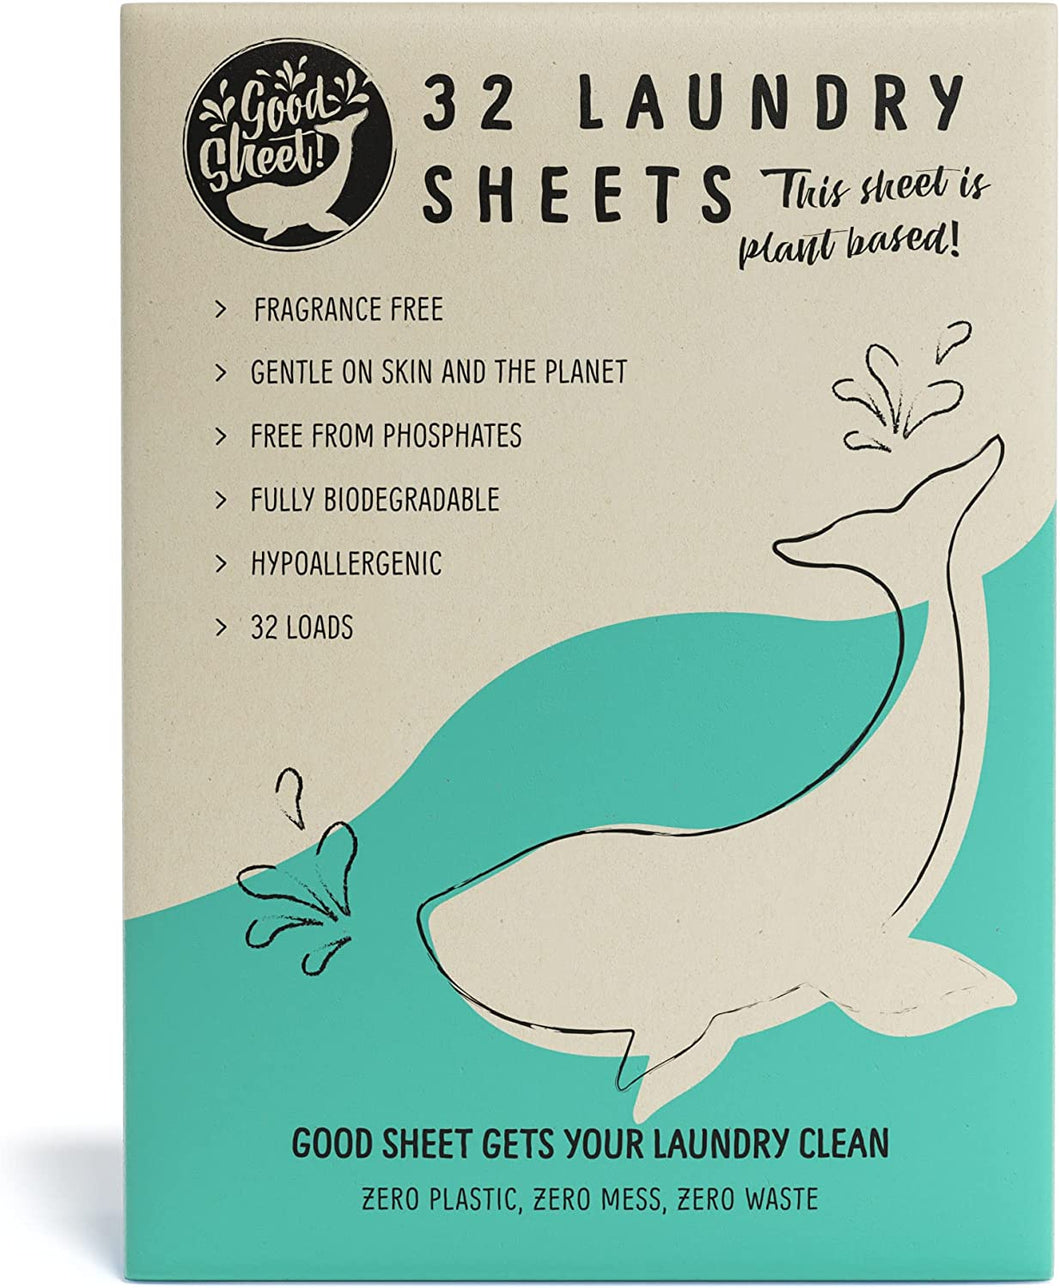 Eco Laundry Detergent Sheets, Fragrance Free, Great for Travel, No Plastic, Totally Plant-Based, 32 Washes, Fully Degradable Laundry Sheet Strips for Washing Clothes